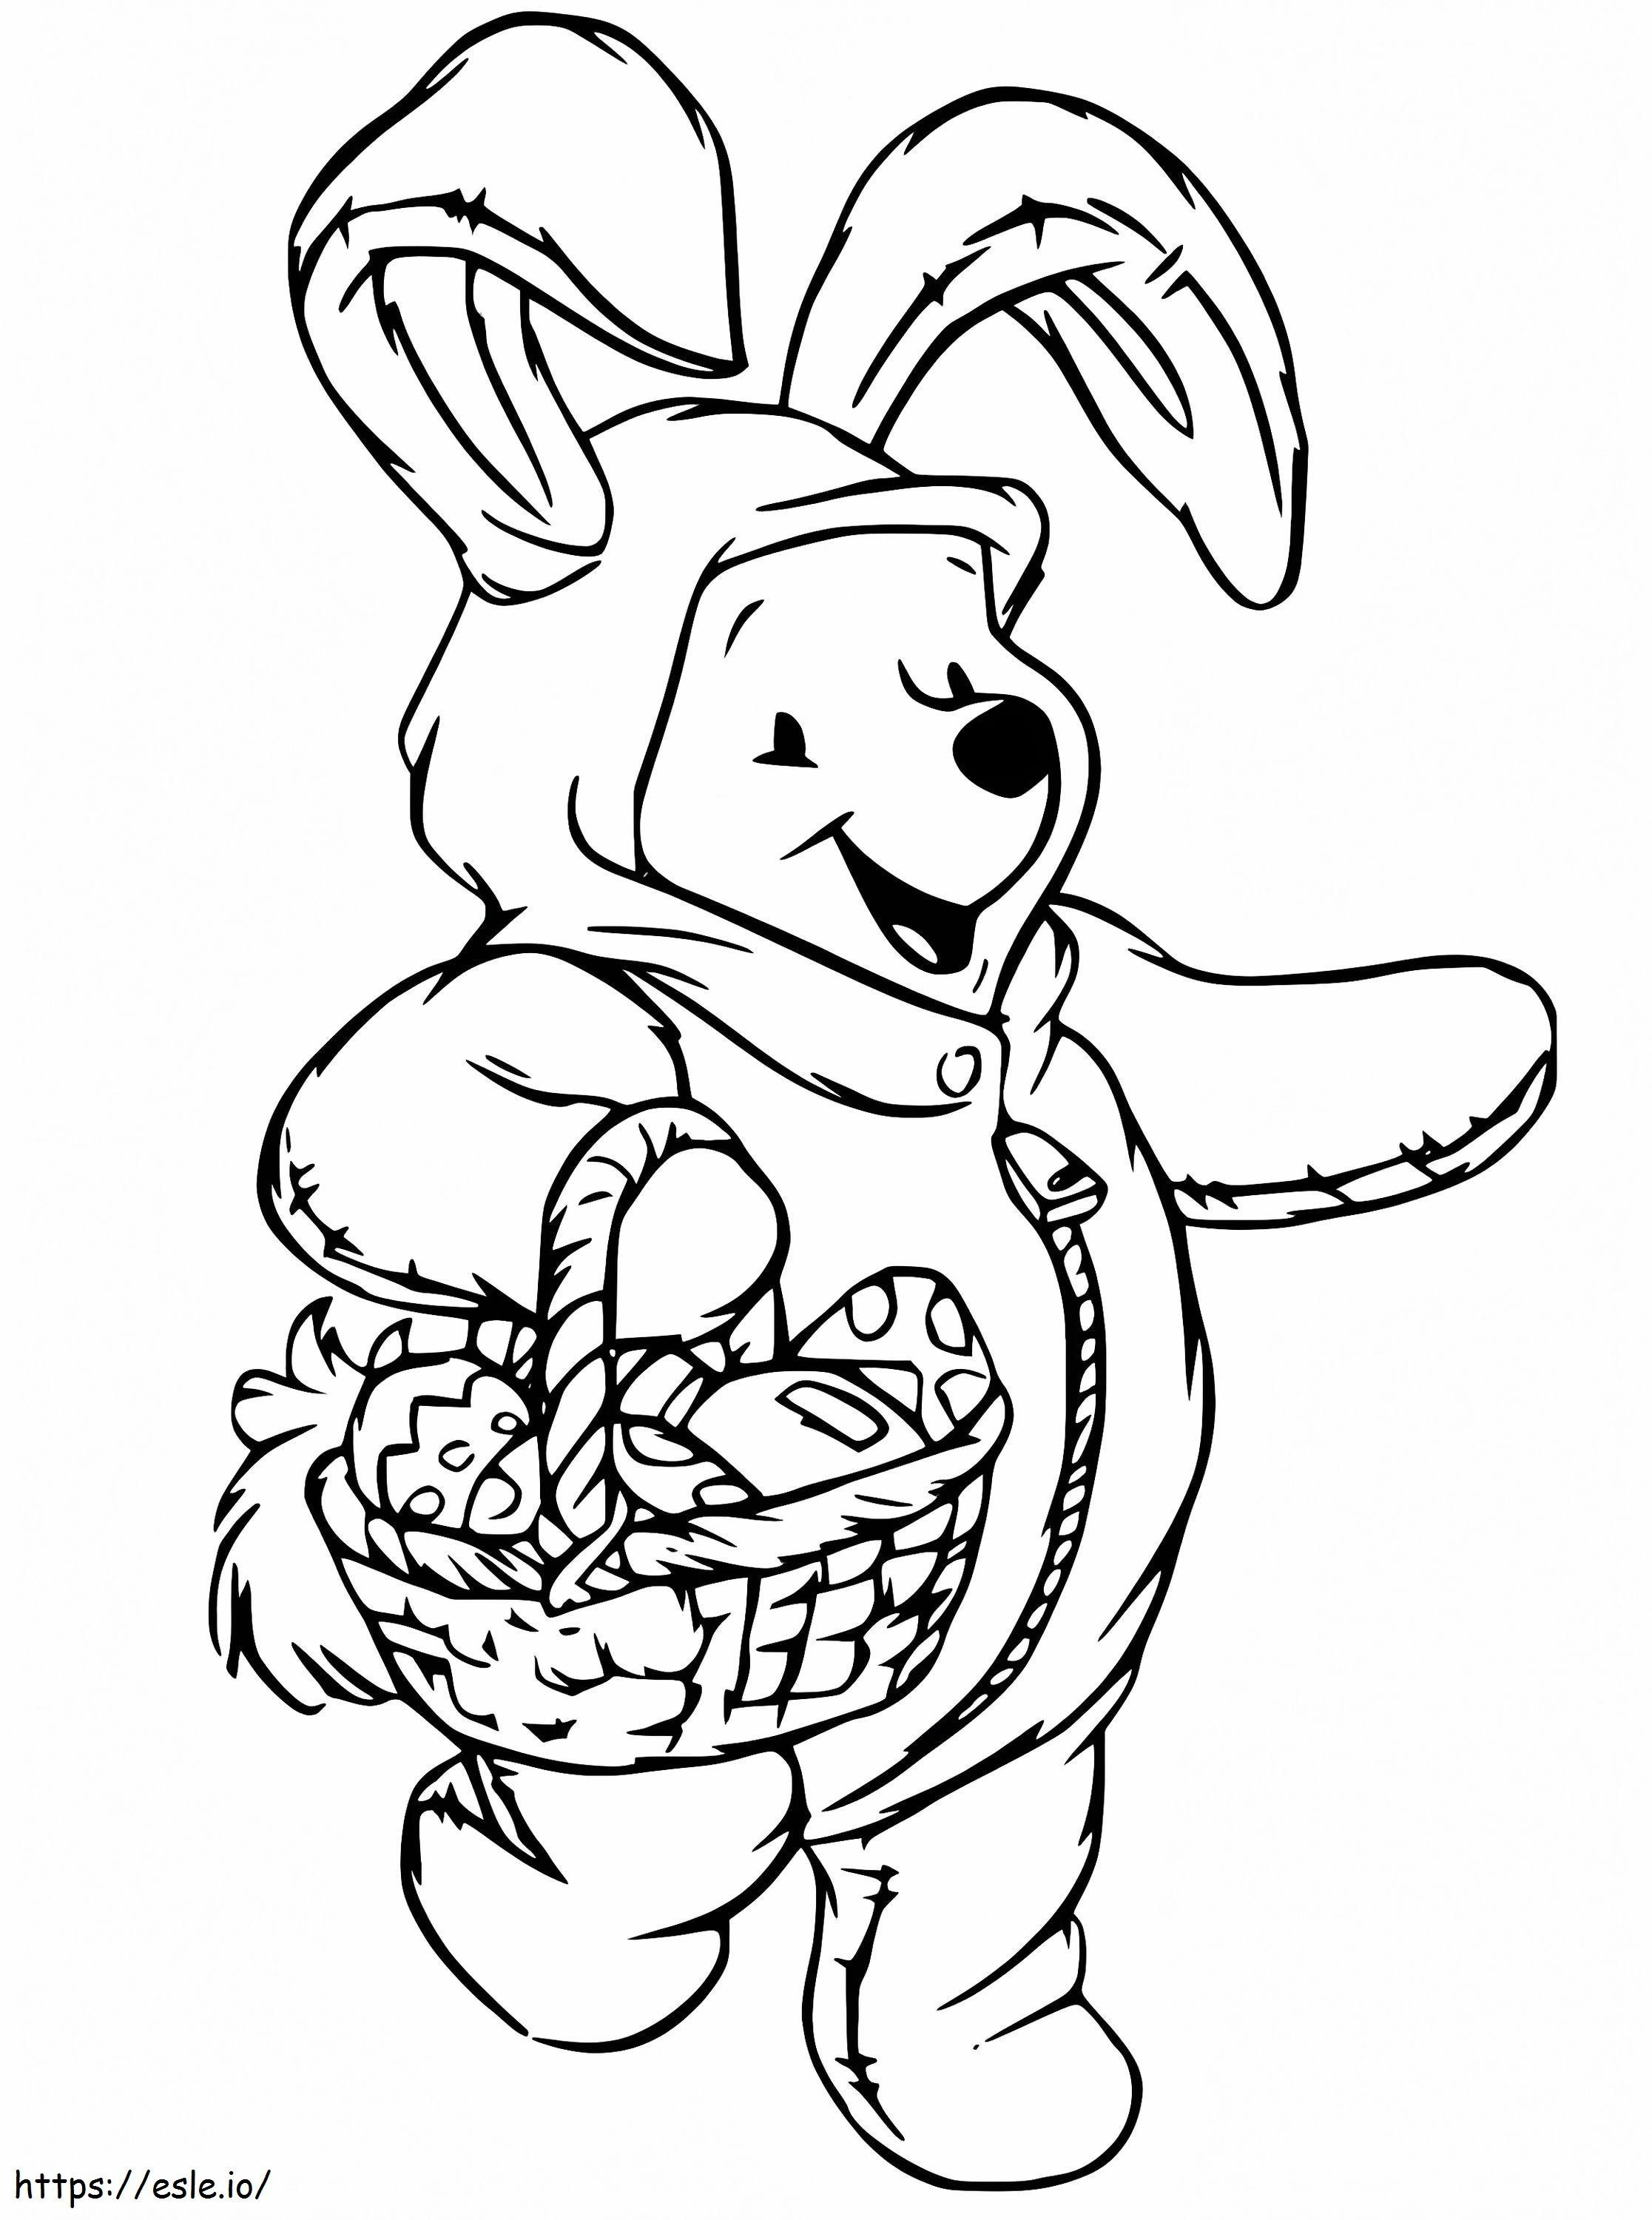 Winnie The Pooh Holding Easter Basket coloring page